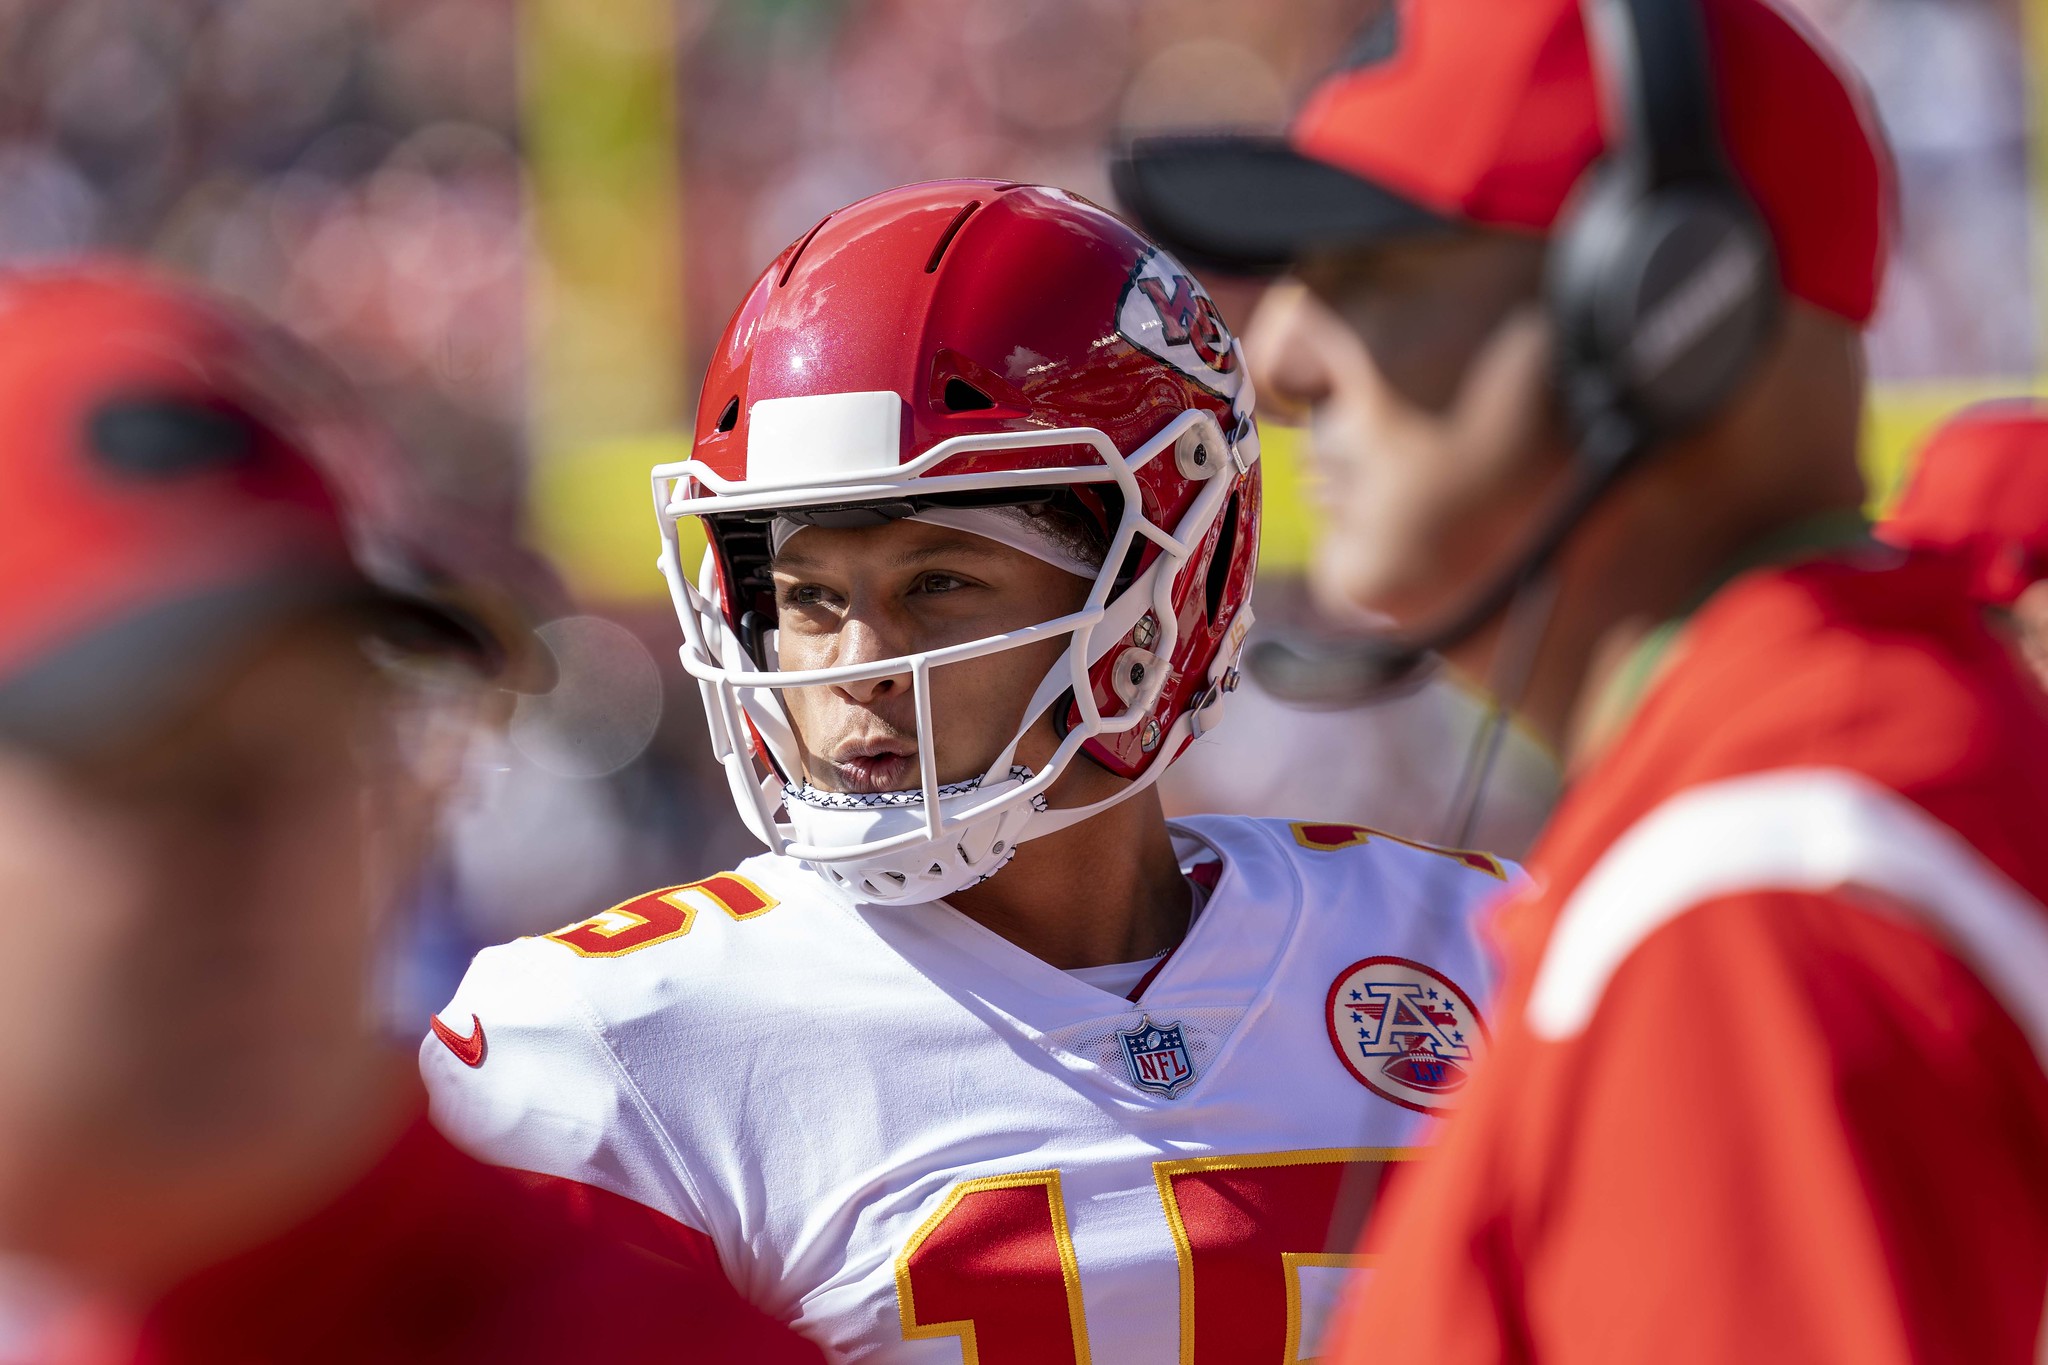 Patrick Mahomes of the Kansas City Chiefs stares from the sideline.